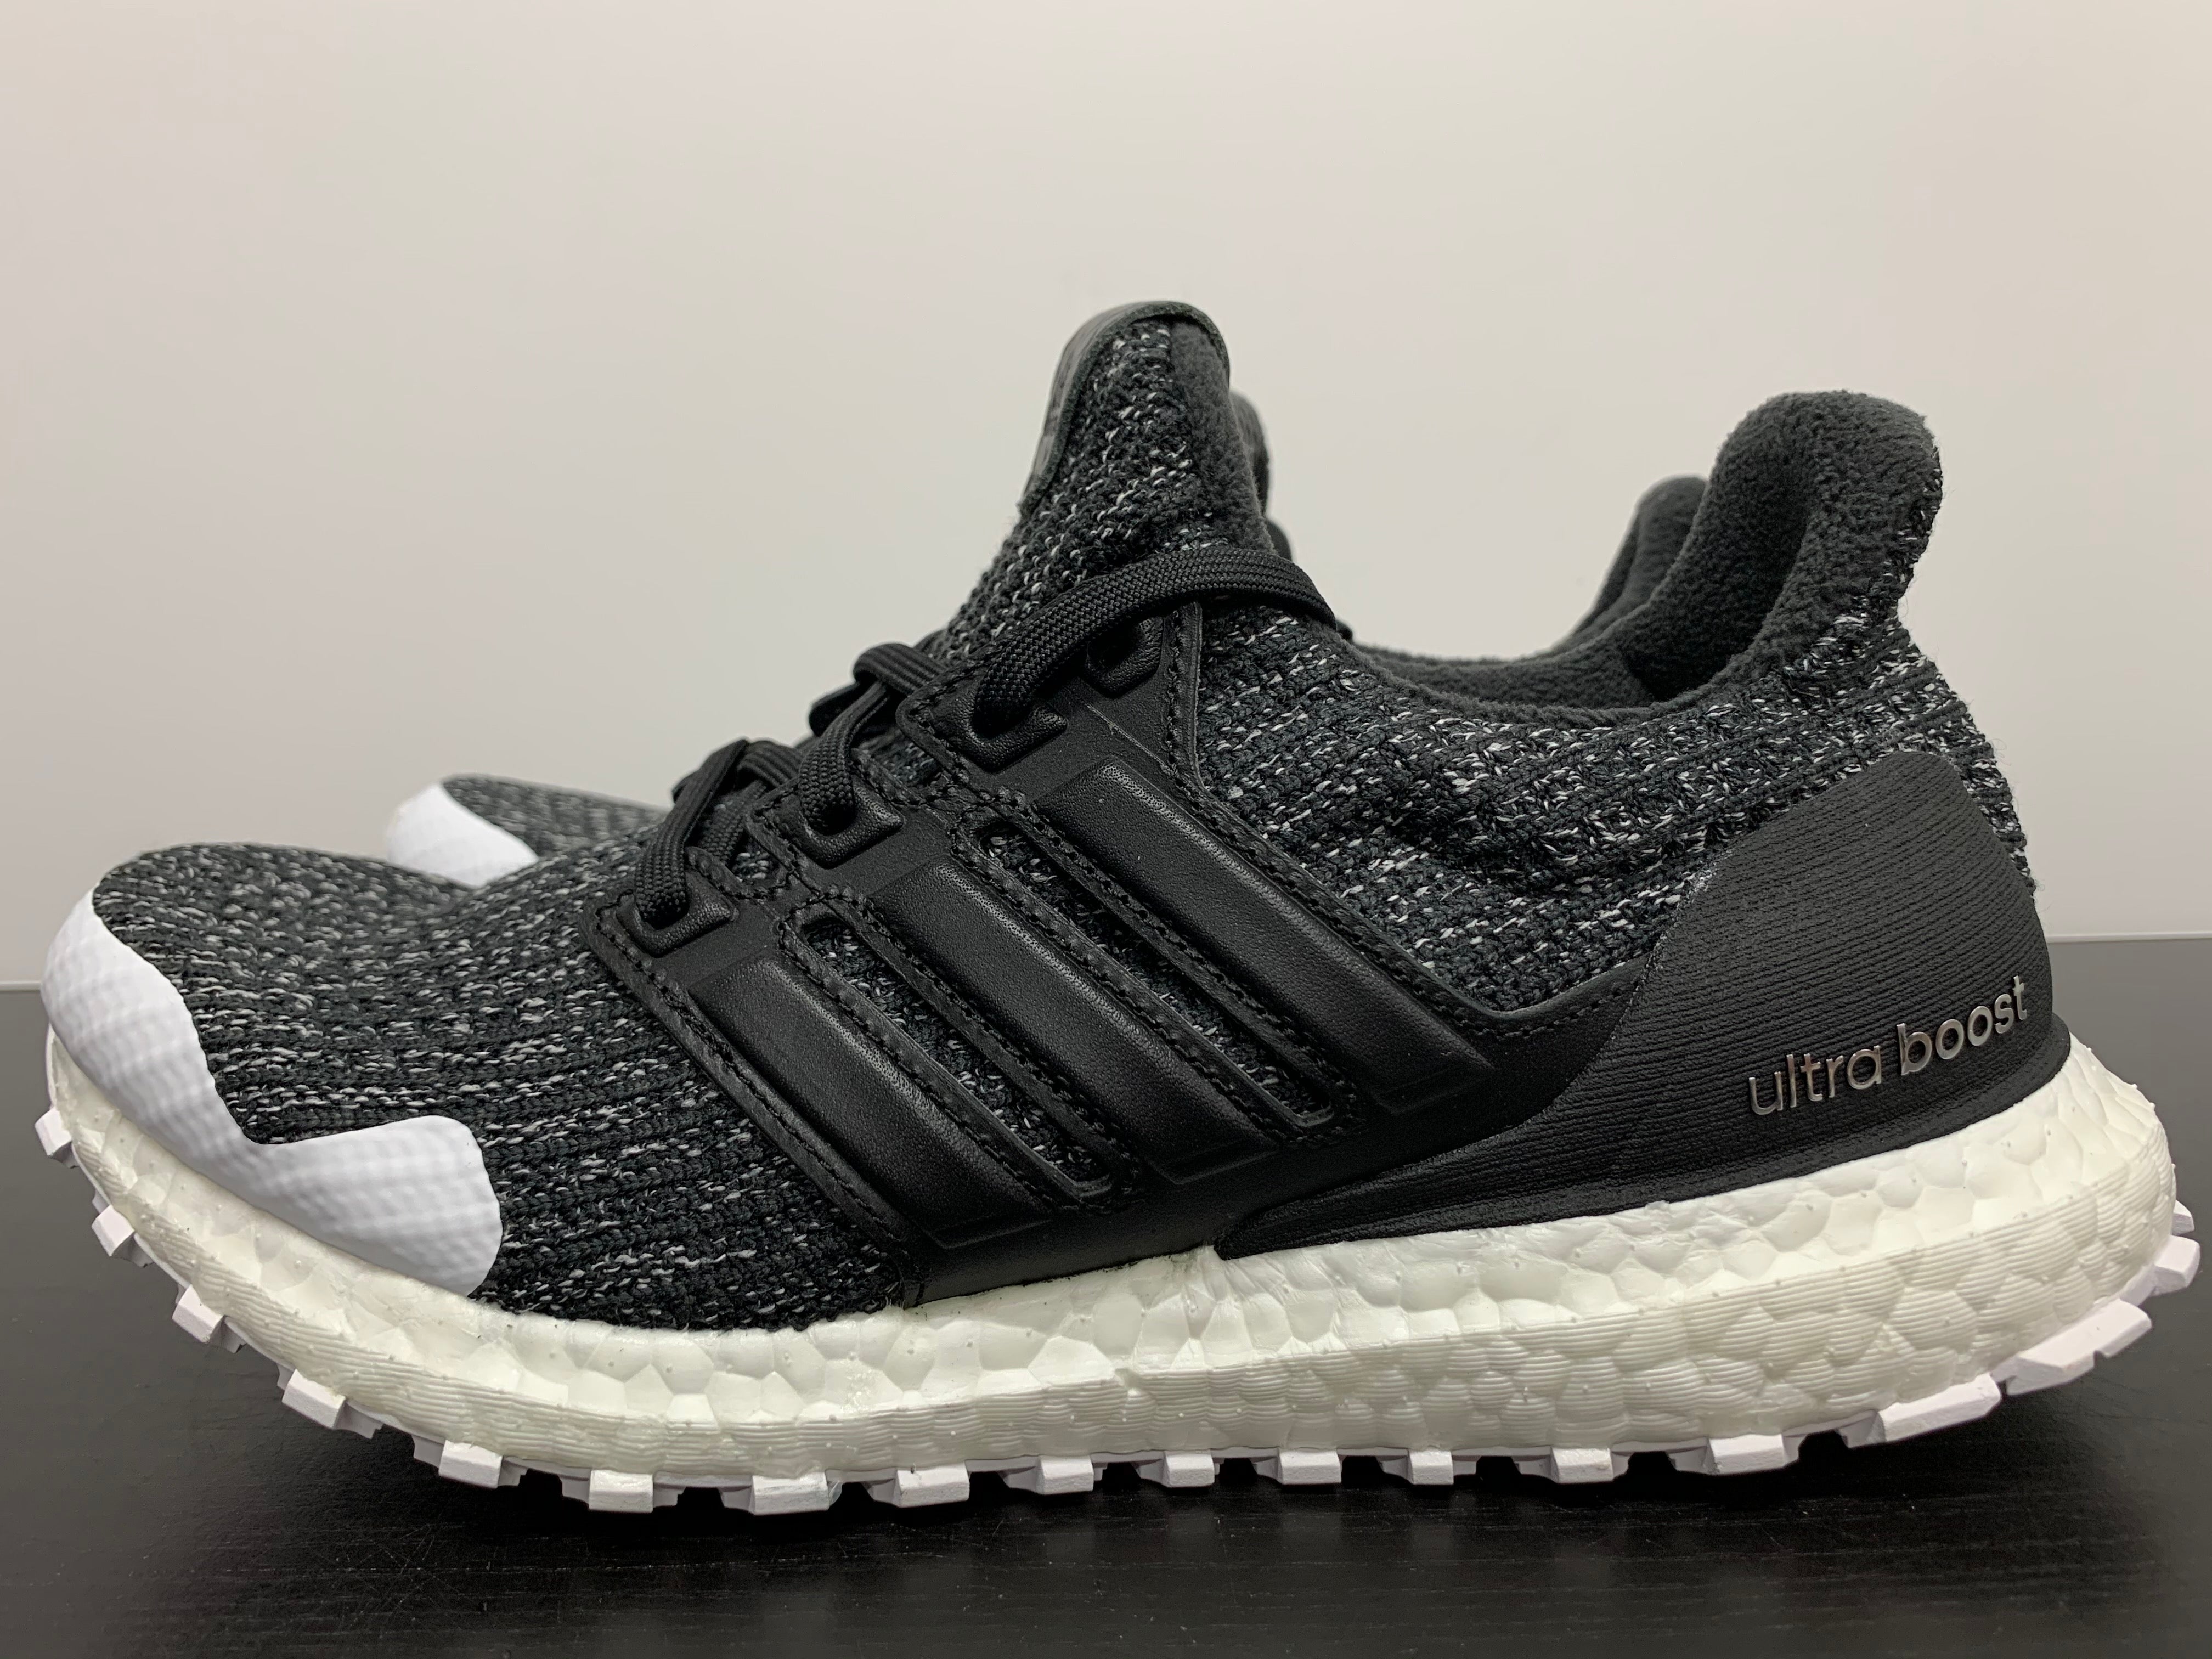 adidas ultra boost 4.0 game of thrones night's watch